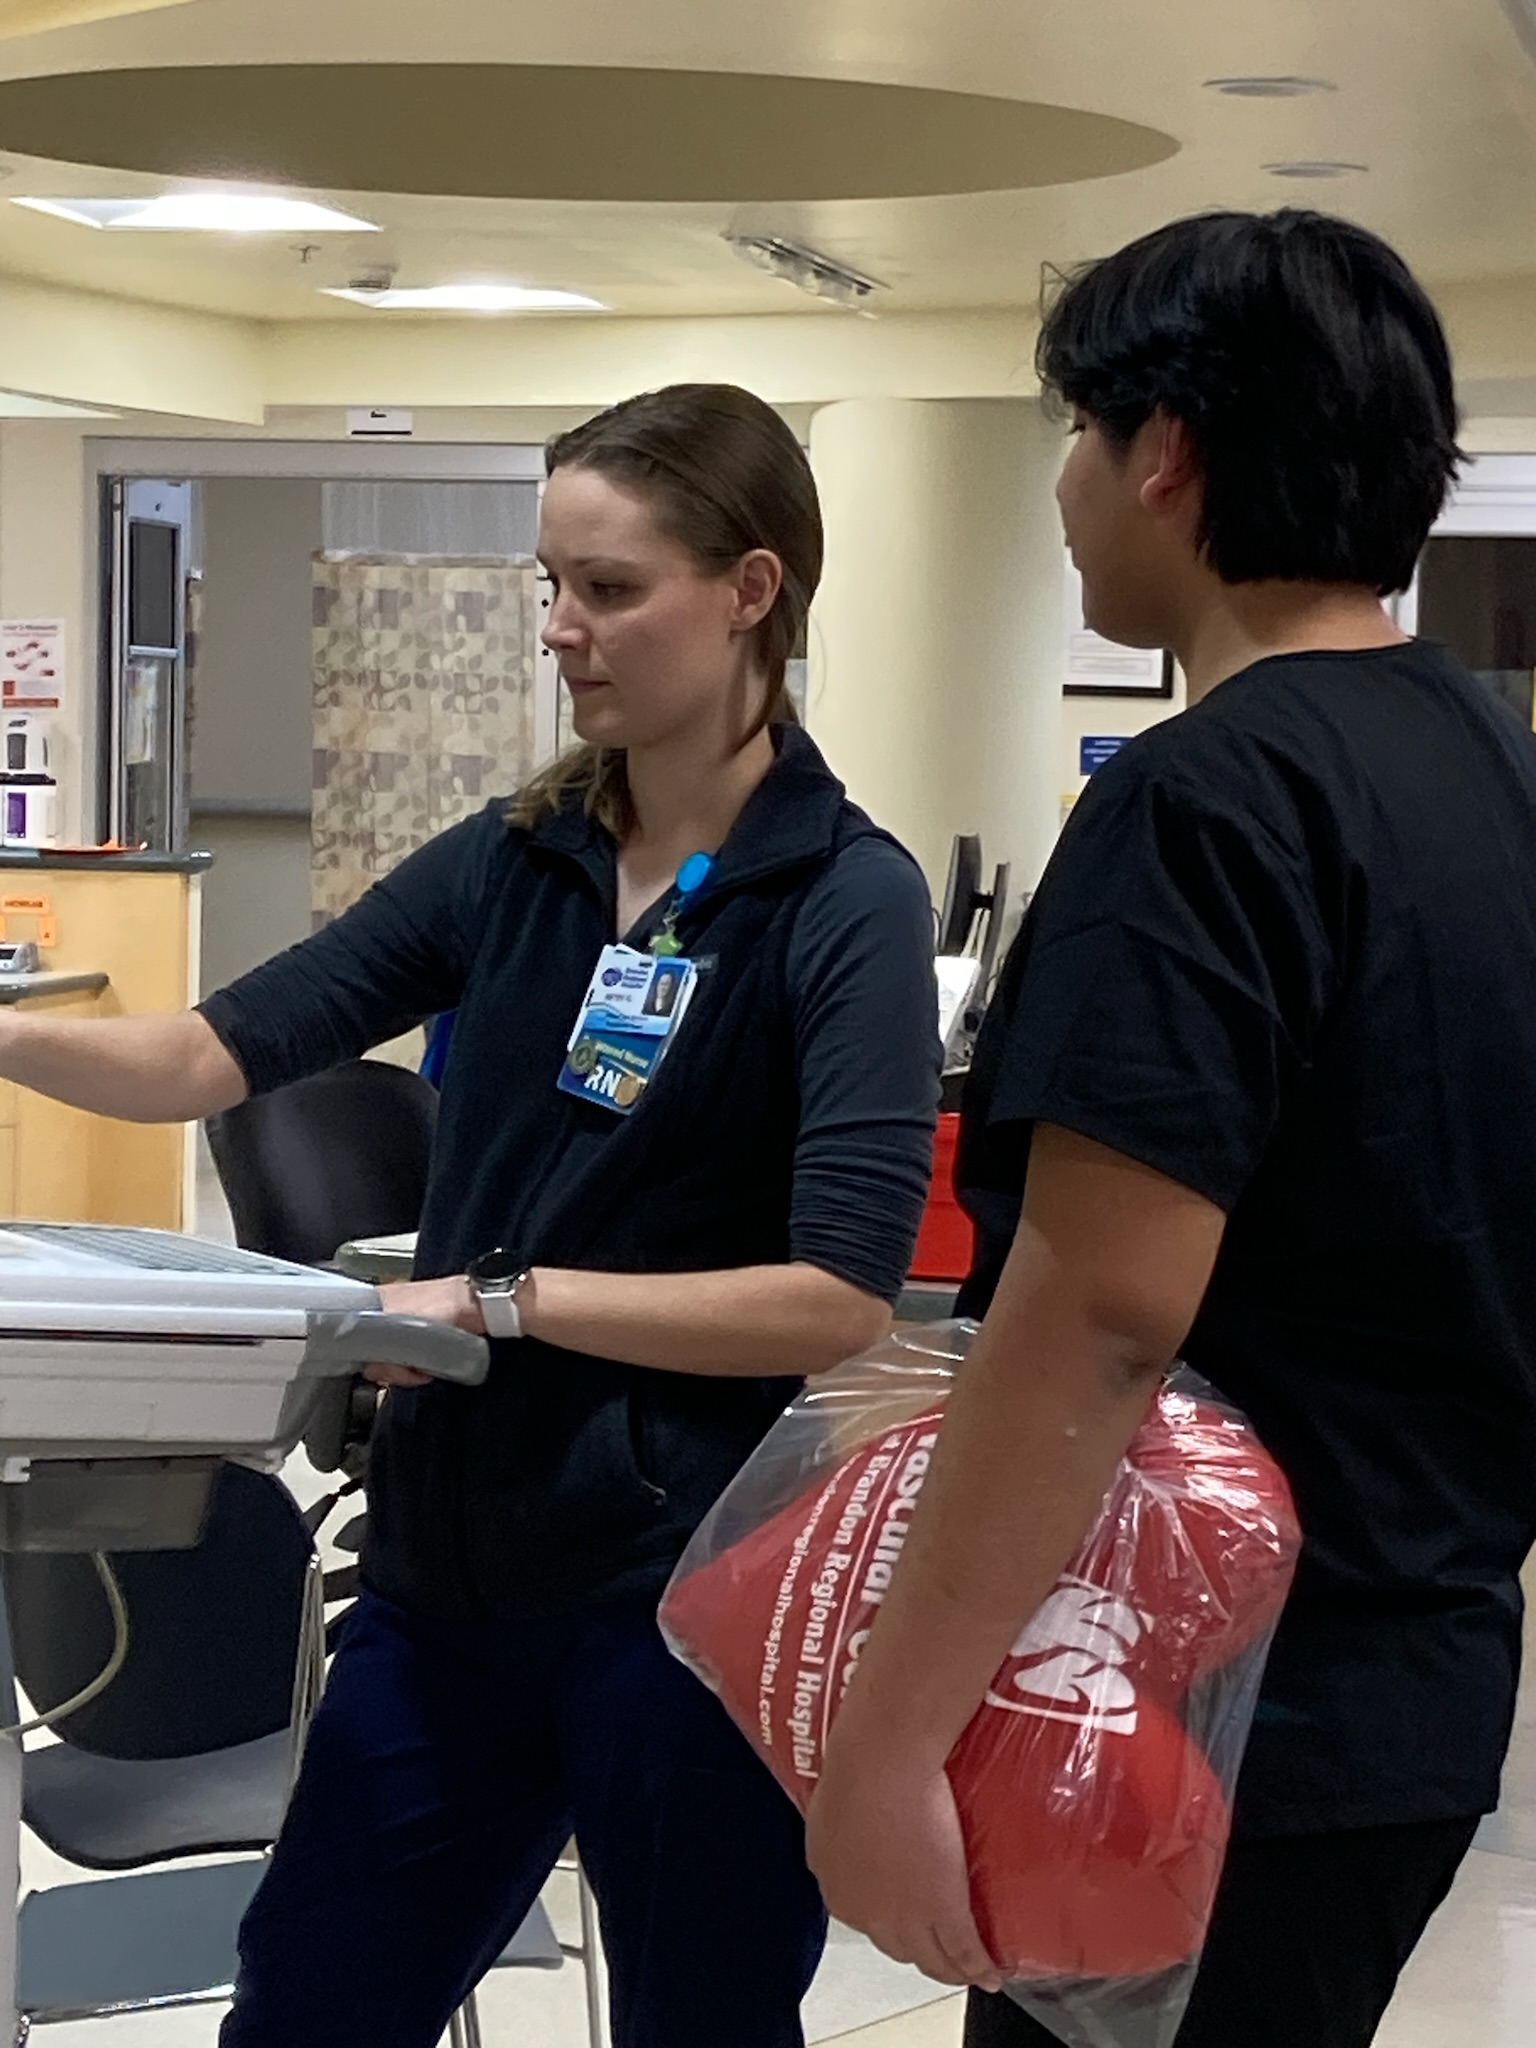 Rubicel Lopez, a local high school student learned about using an Eletrocardiogram (EKG) from registered nurse, Betsy Gant in the Cardiovascular Intensive Care Unit (CVICU) at HCA Florida Brandon Hospital.